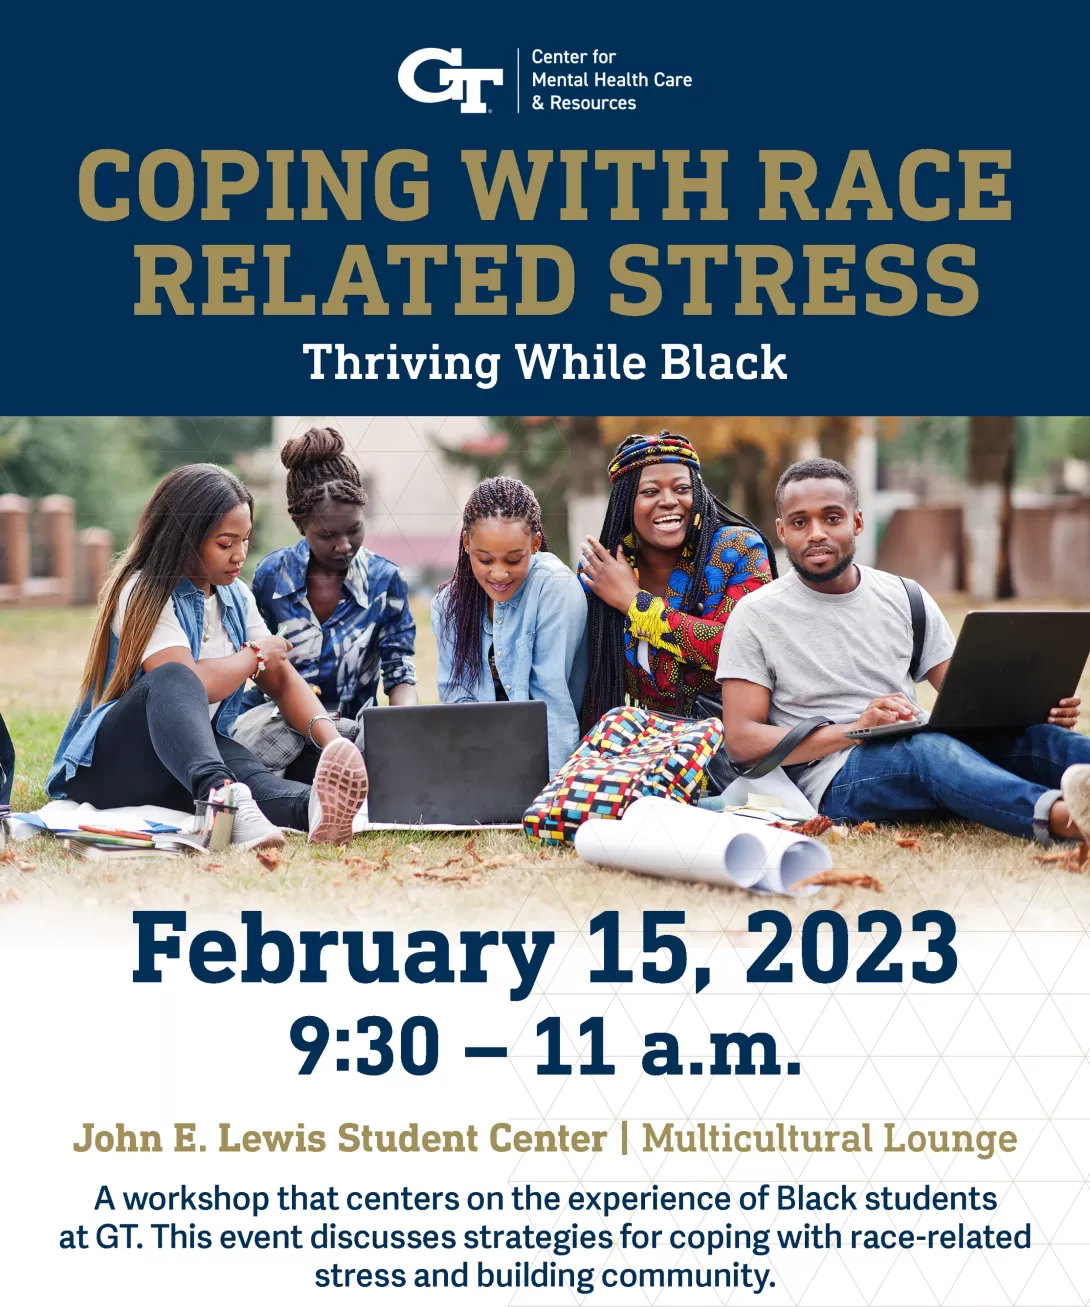 This workshop centers on the experience of Black students at GT and discusses strategies for coping with race-related stress and building community.